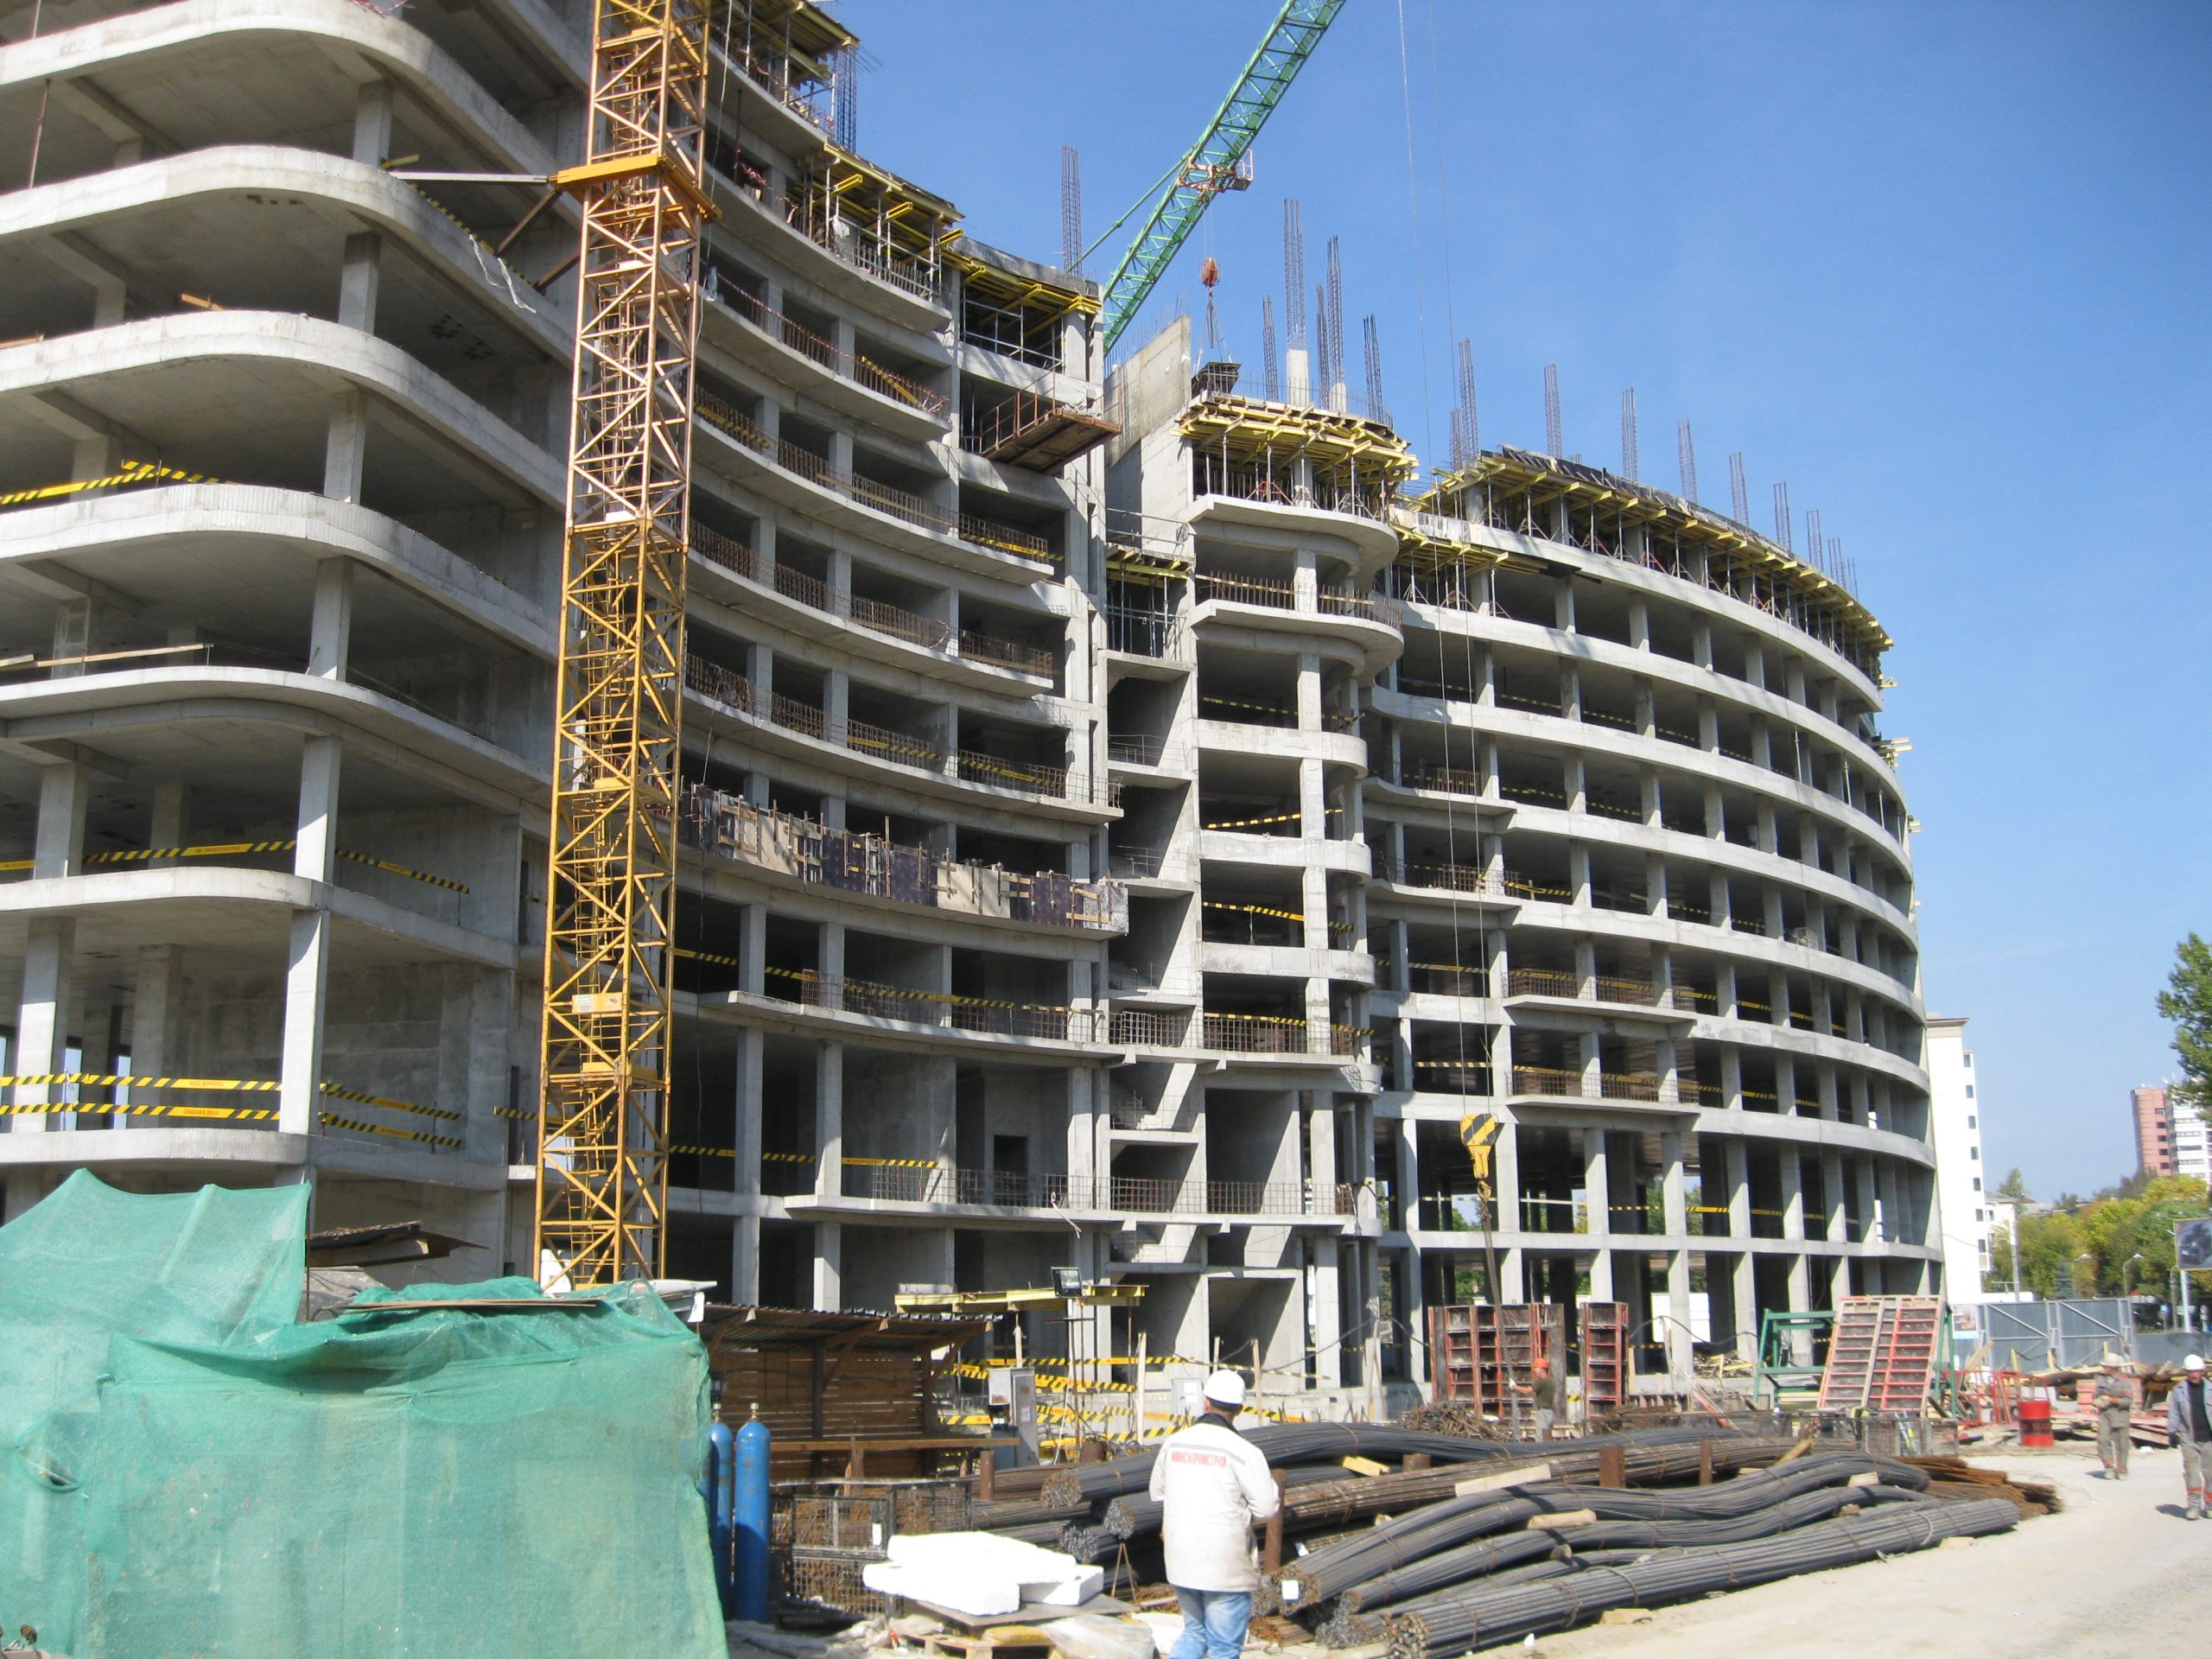 Housing construction at people’s own costs is likely to ensure stable currency supply